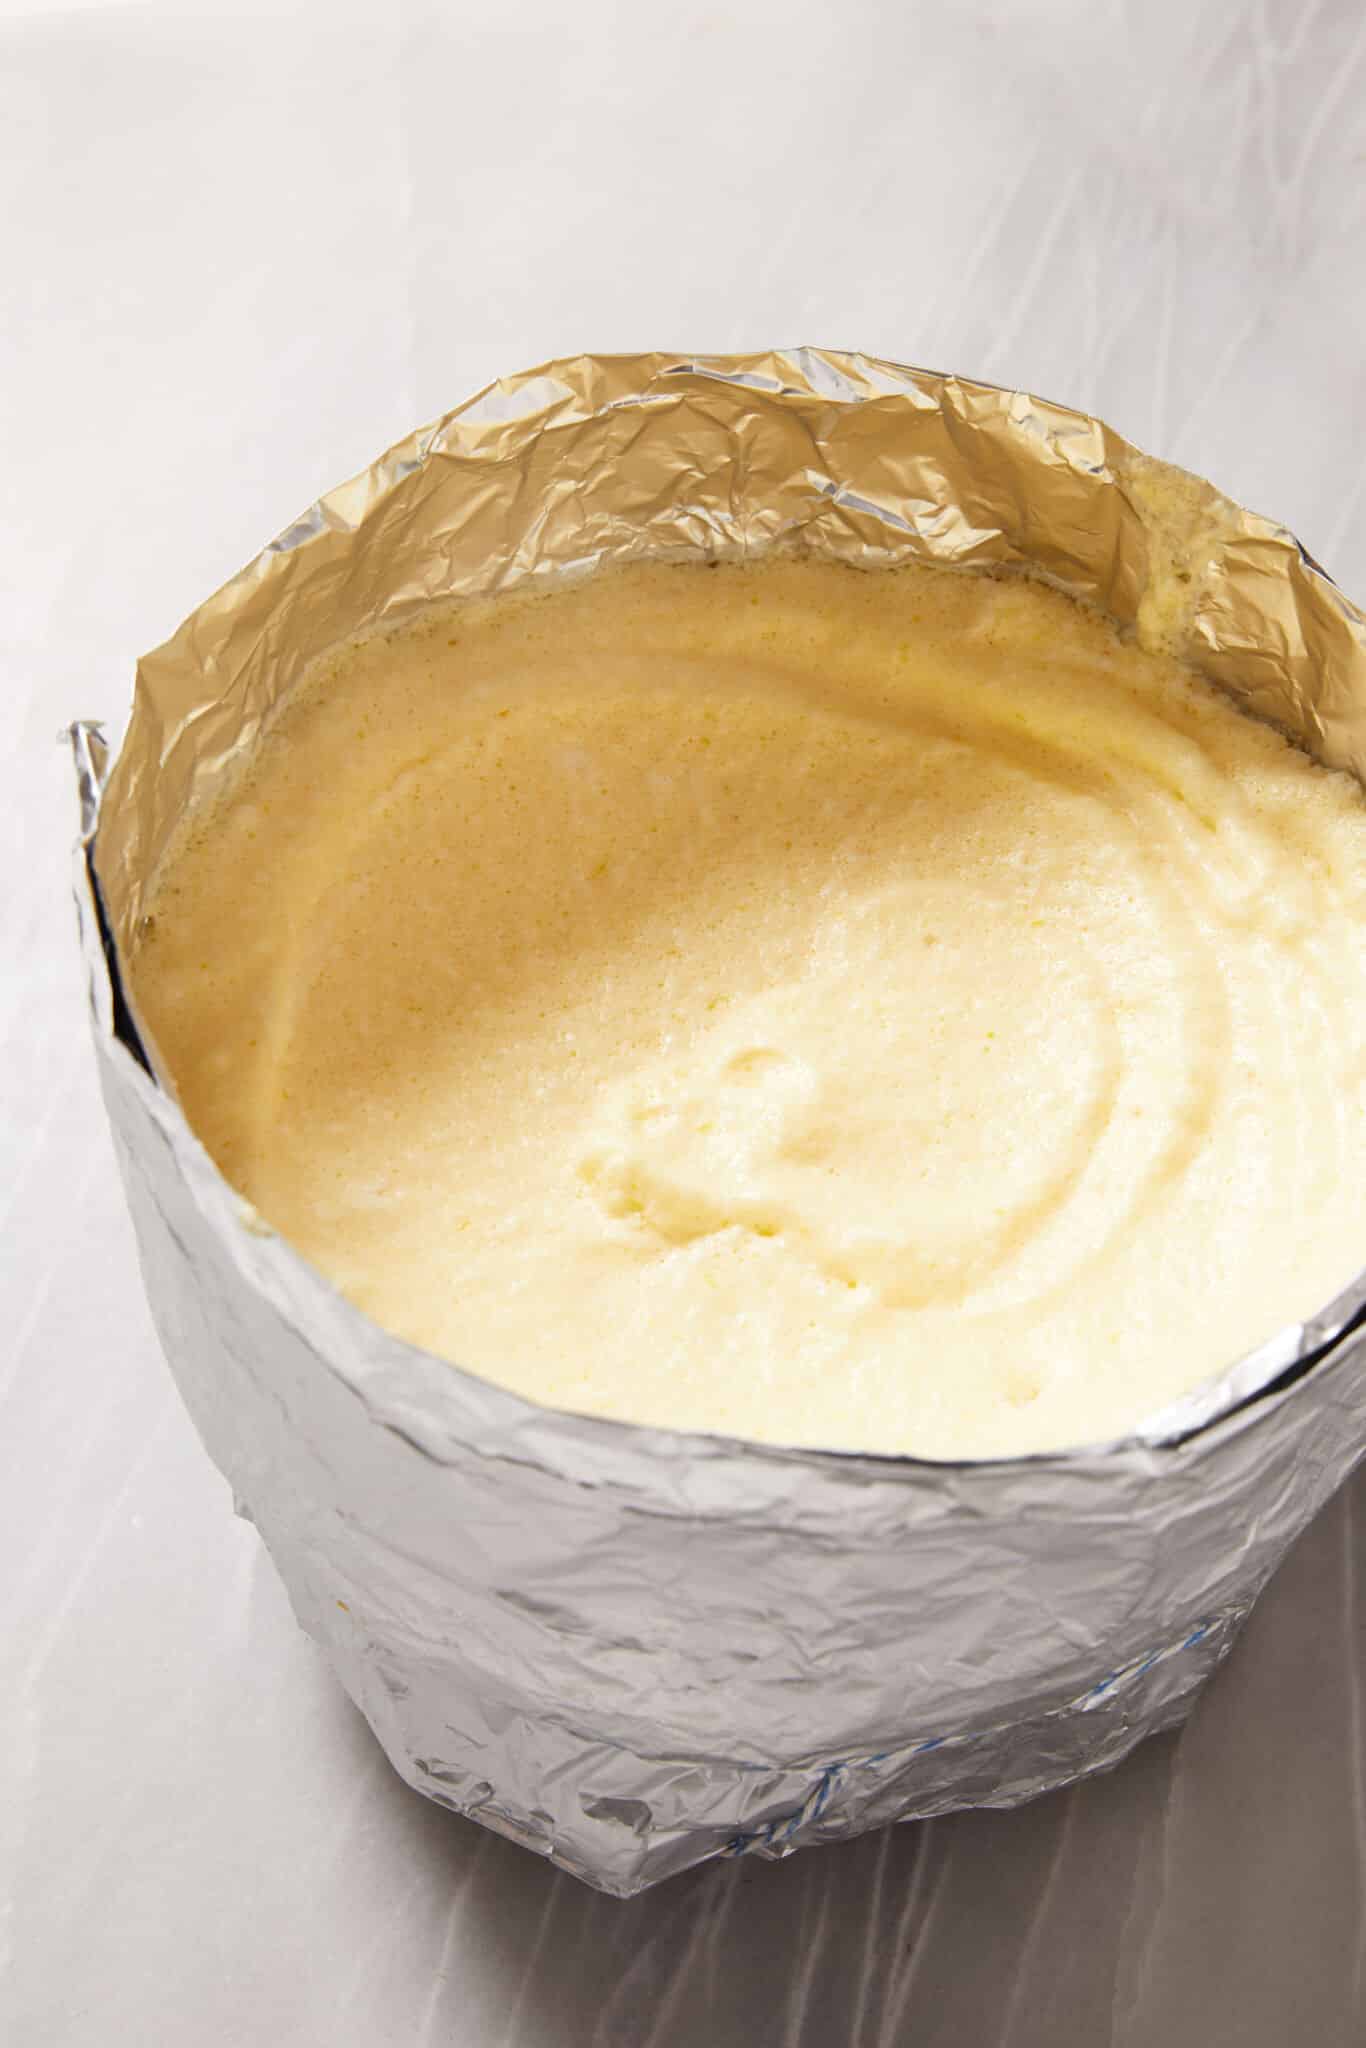 The airy, light and velvety soufflé mixture is poured into the prepared dish with aluminum foil, ready for being transferred to the freezer to set. 